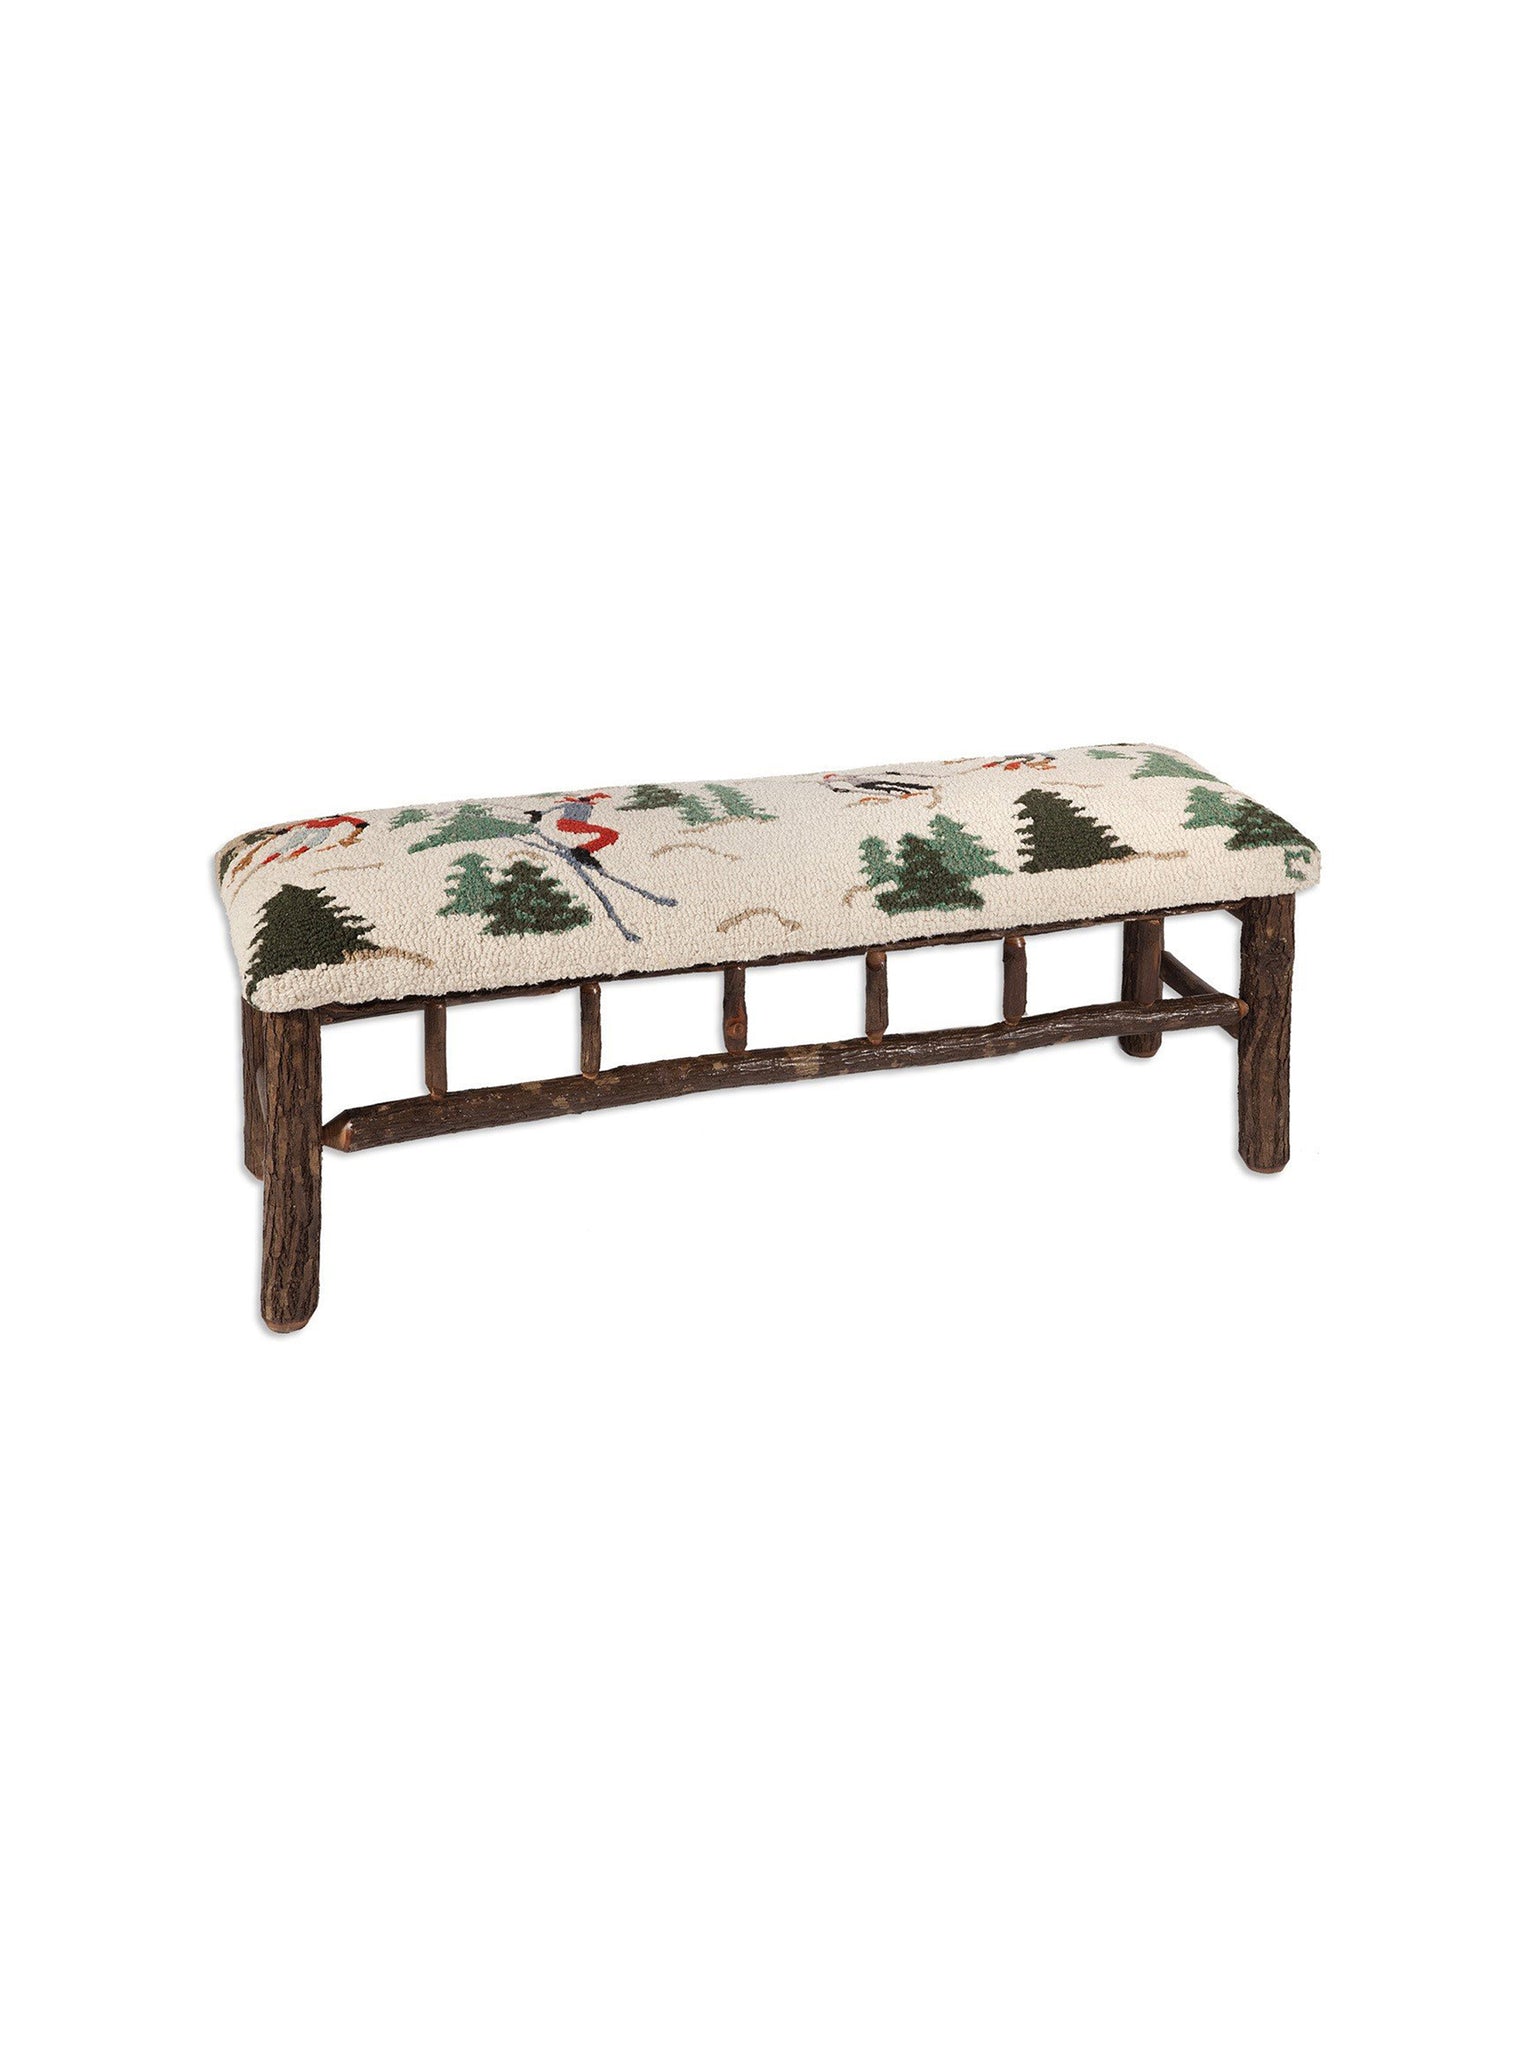 Skier Hooked Wool Top Bench 15 x 48 Weston Table